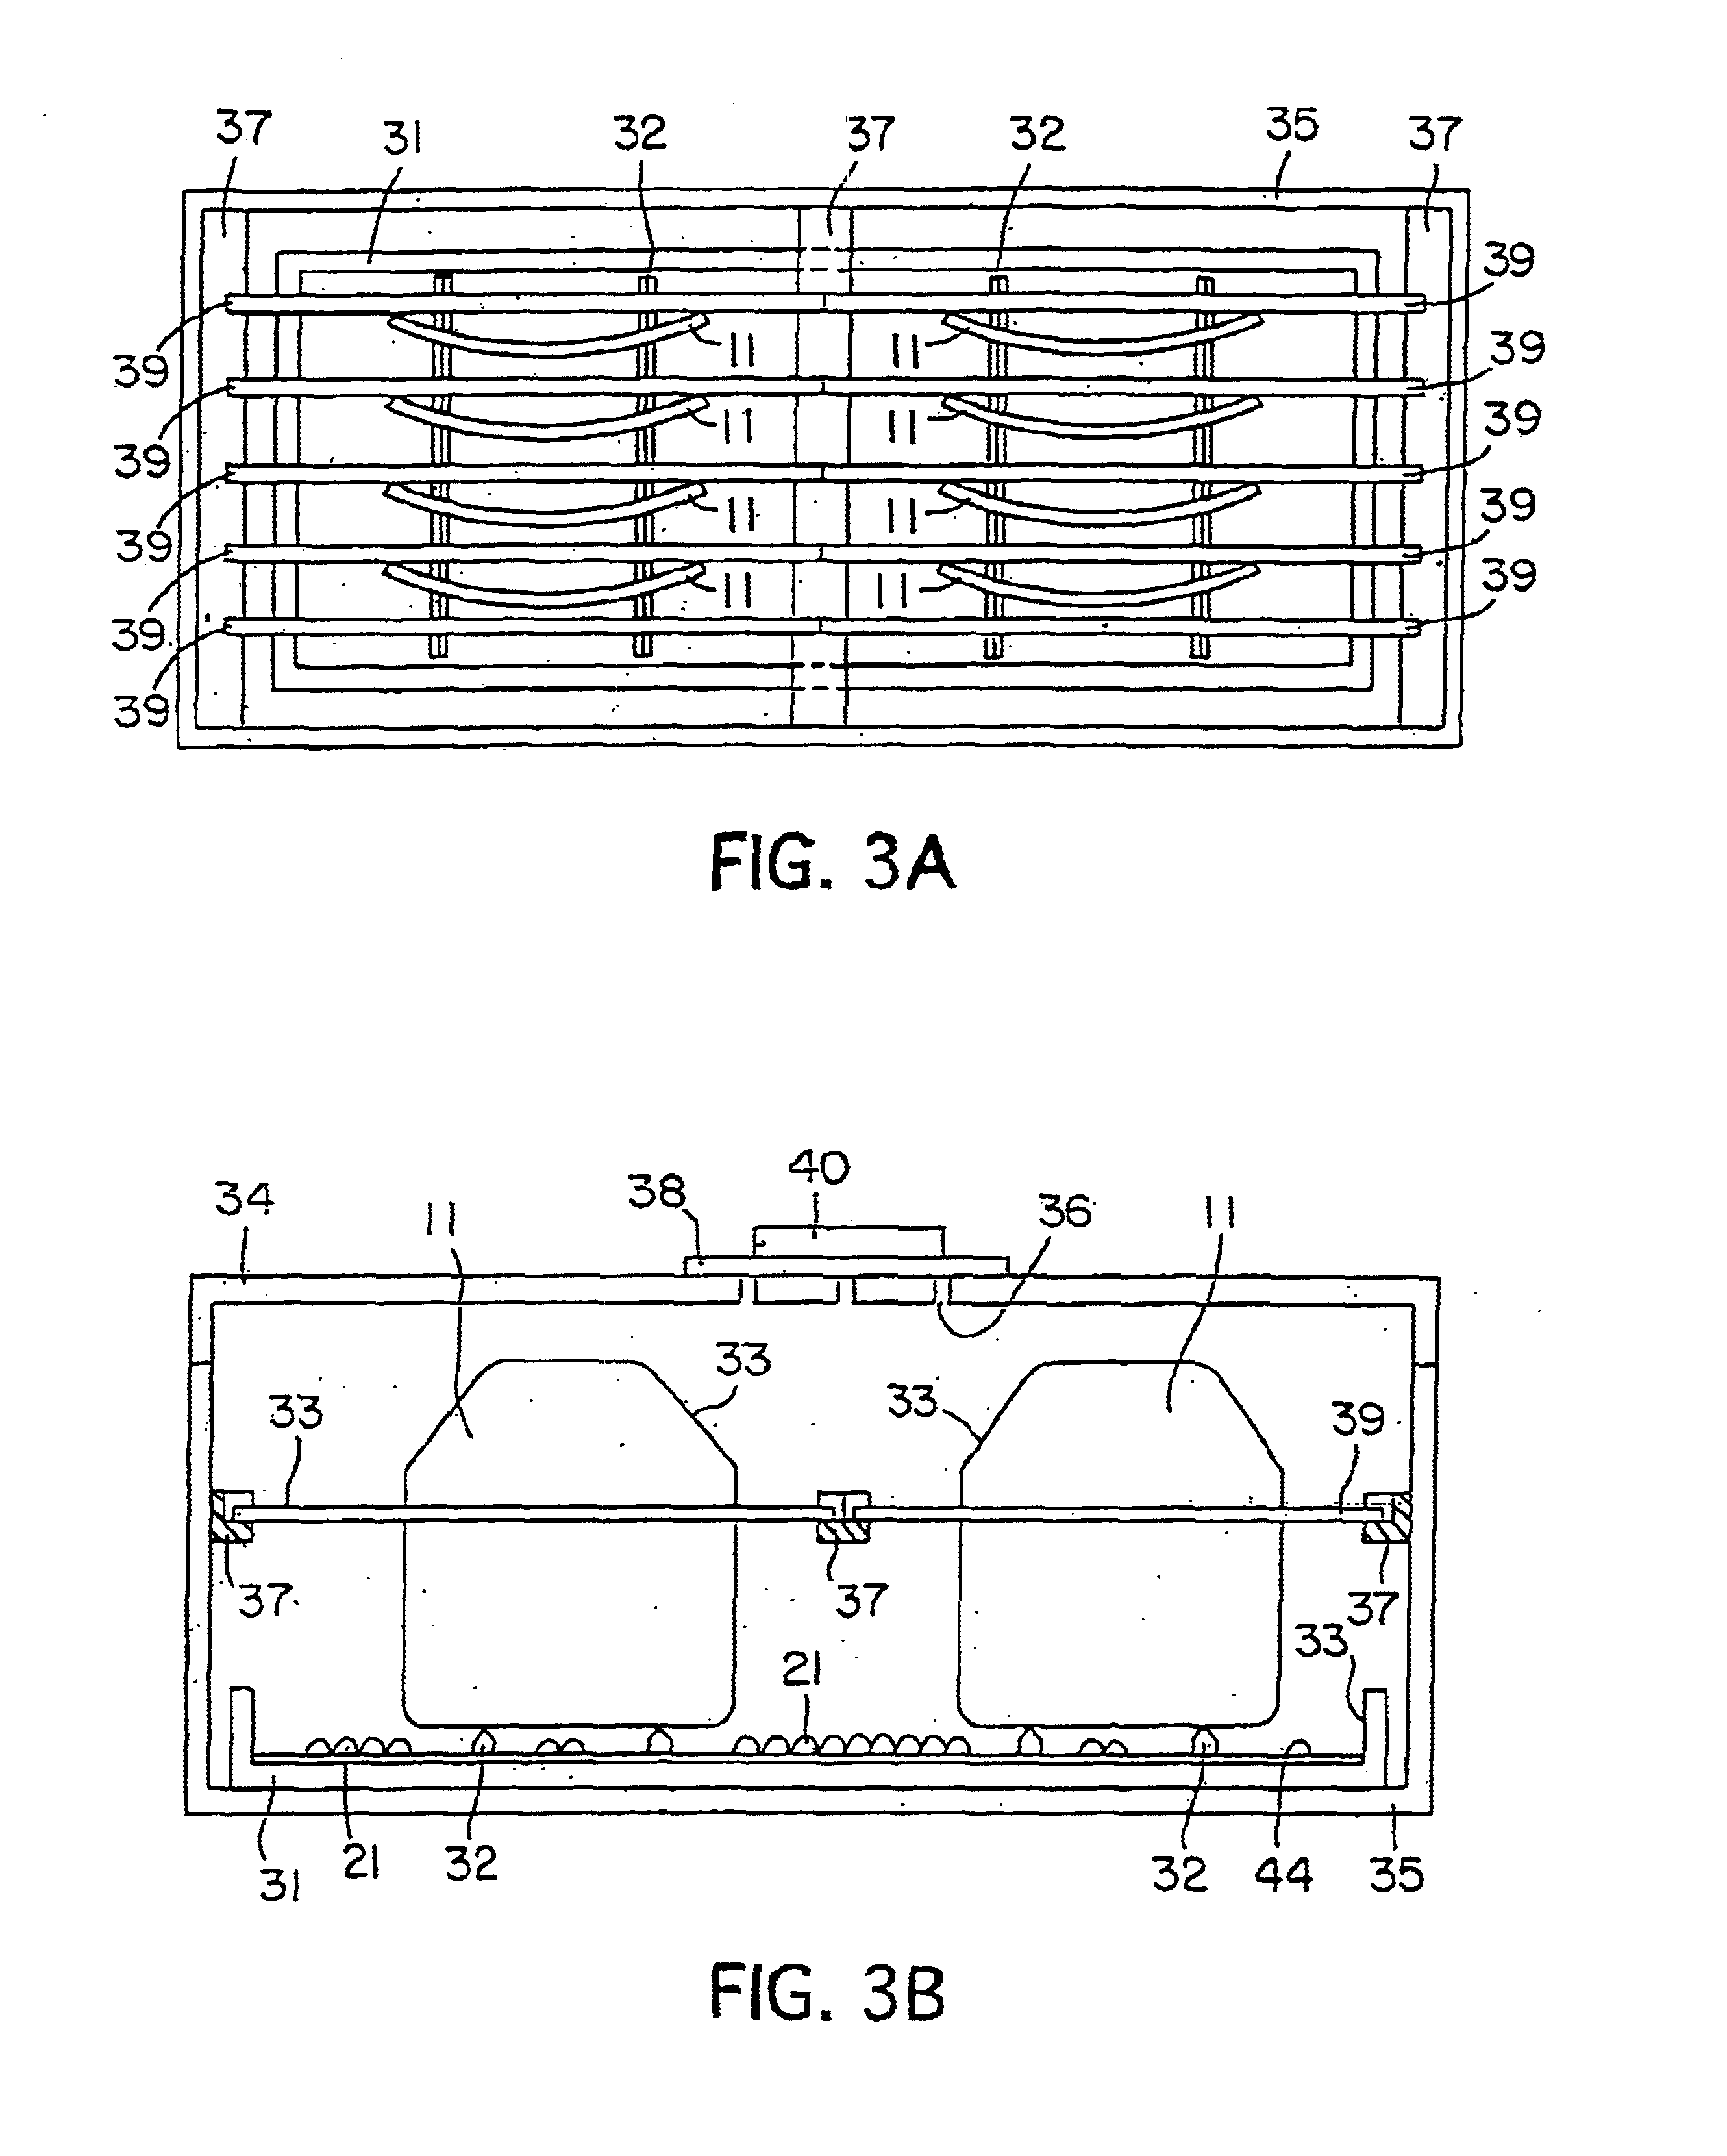 Ceramic-rich composite armor, and methods for making same